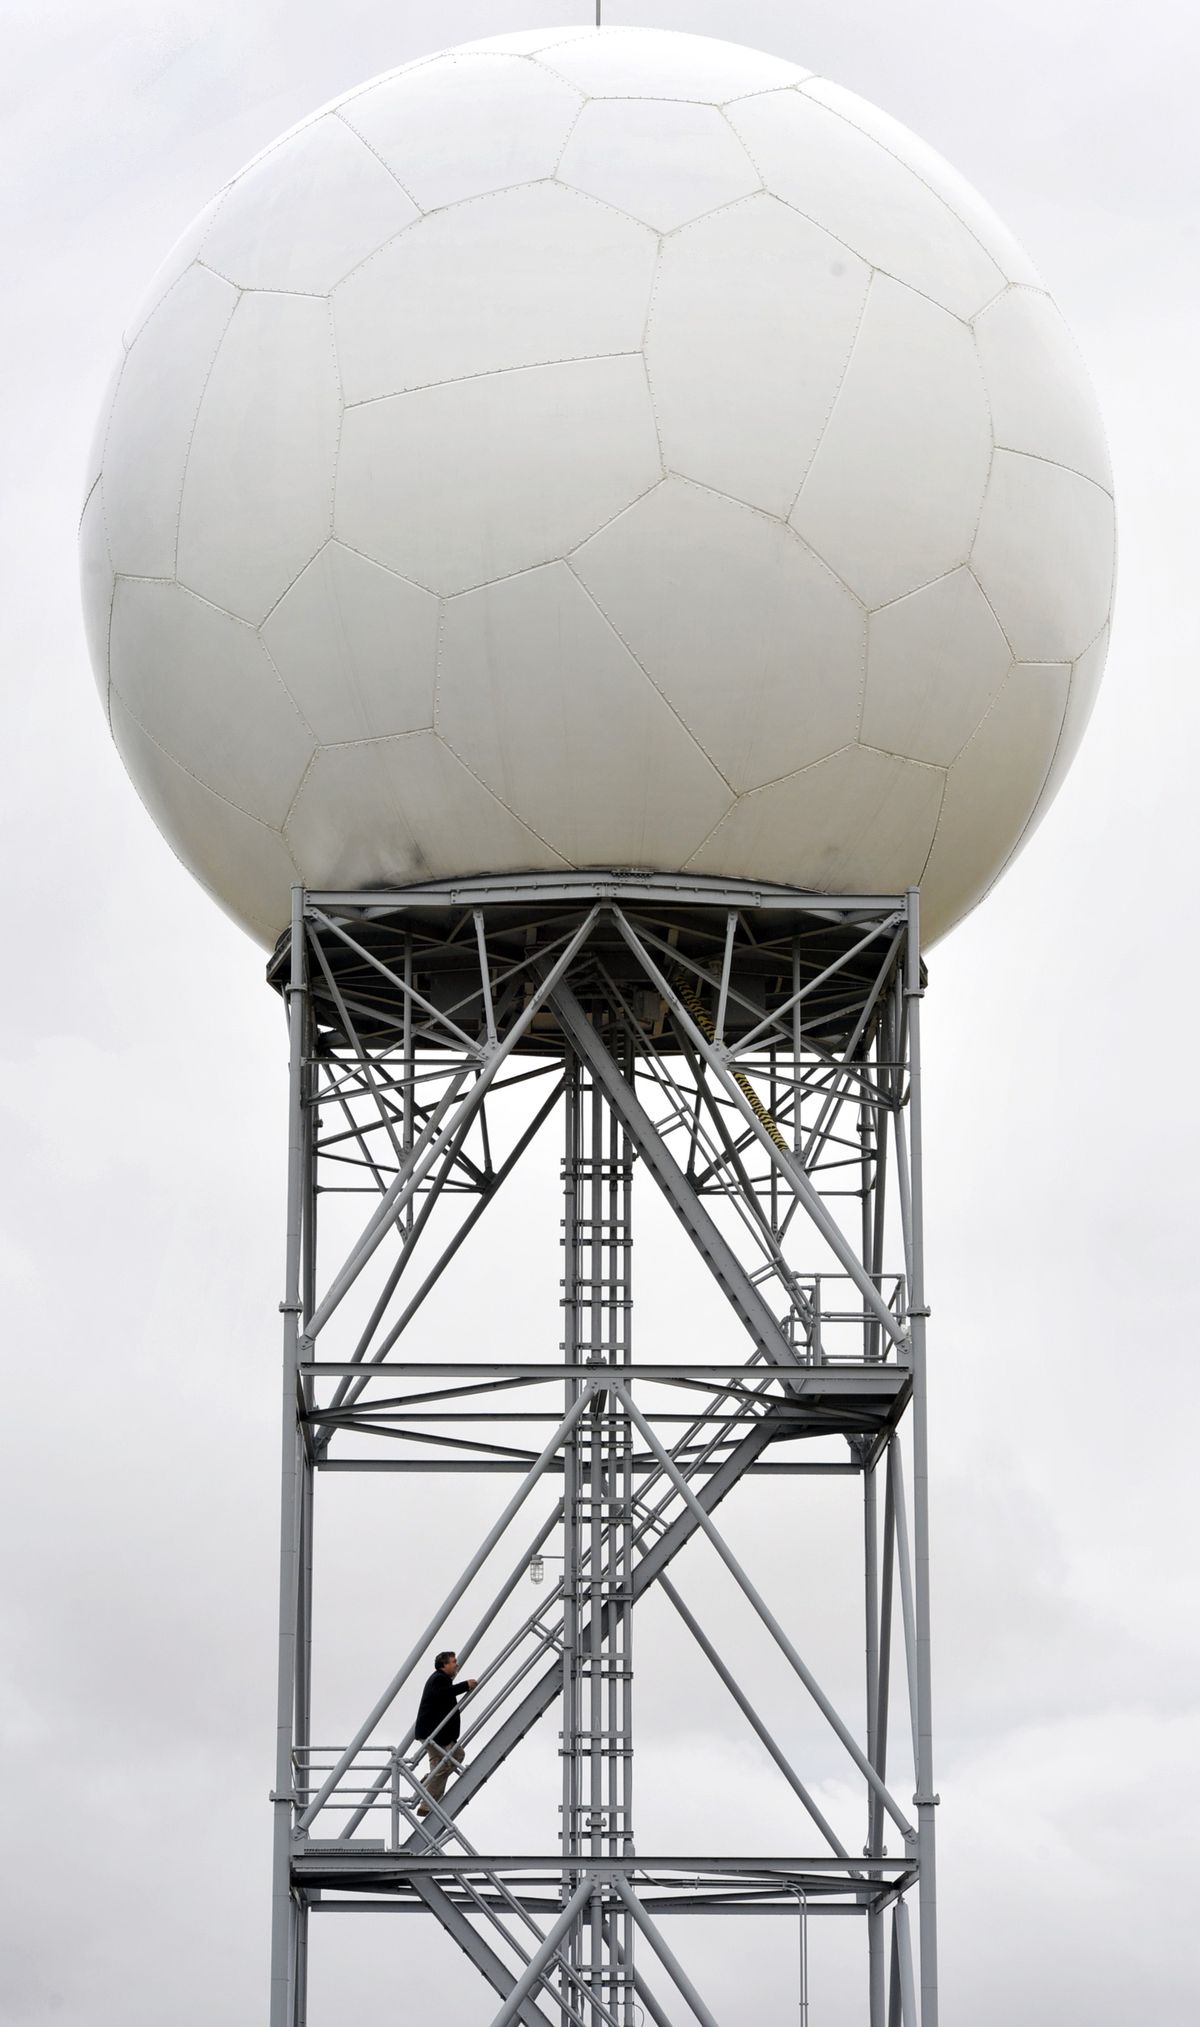 John Livingston, meteorologist in charge at the National Weather Service in Spokane, climbs the stairs of the Doppler radar tower near Airway Heights. (Dan Pelle)